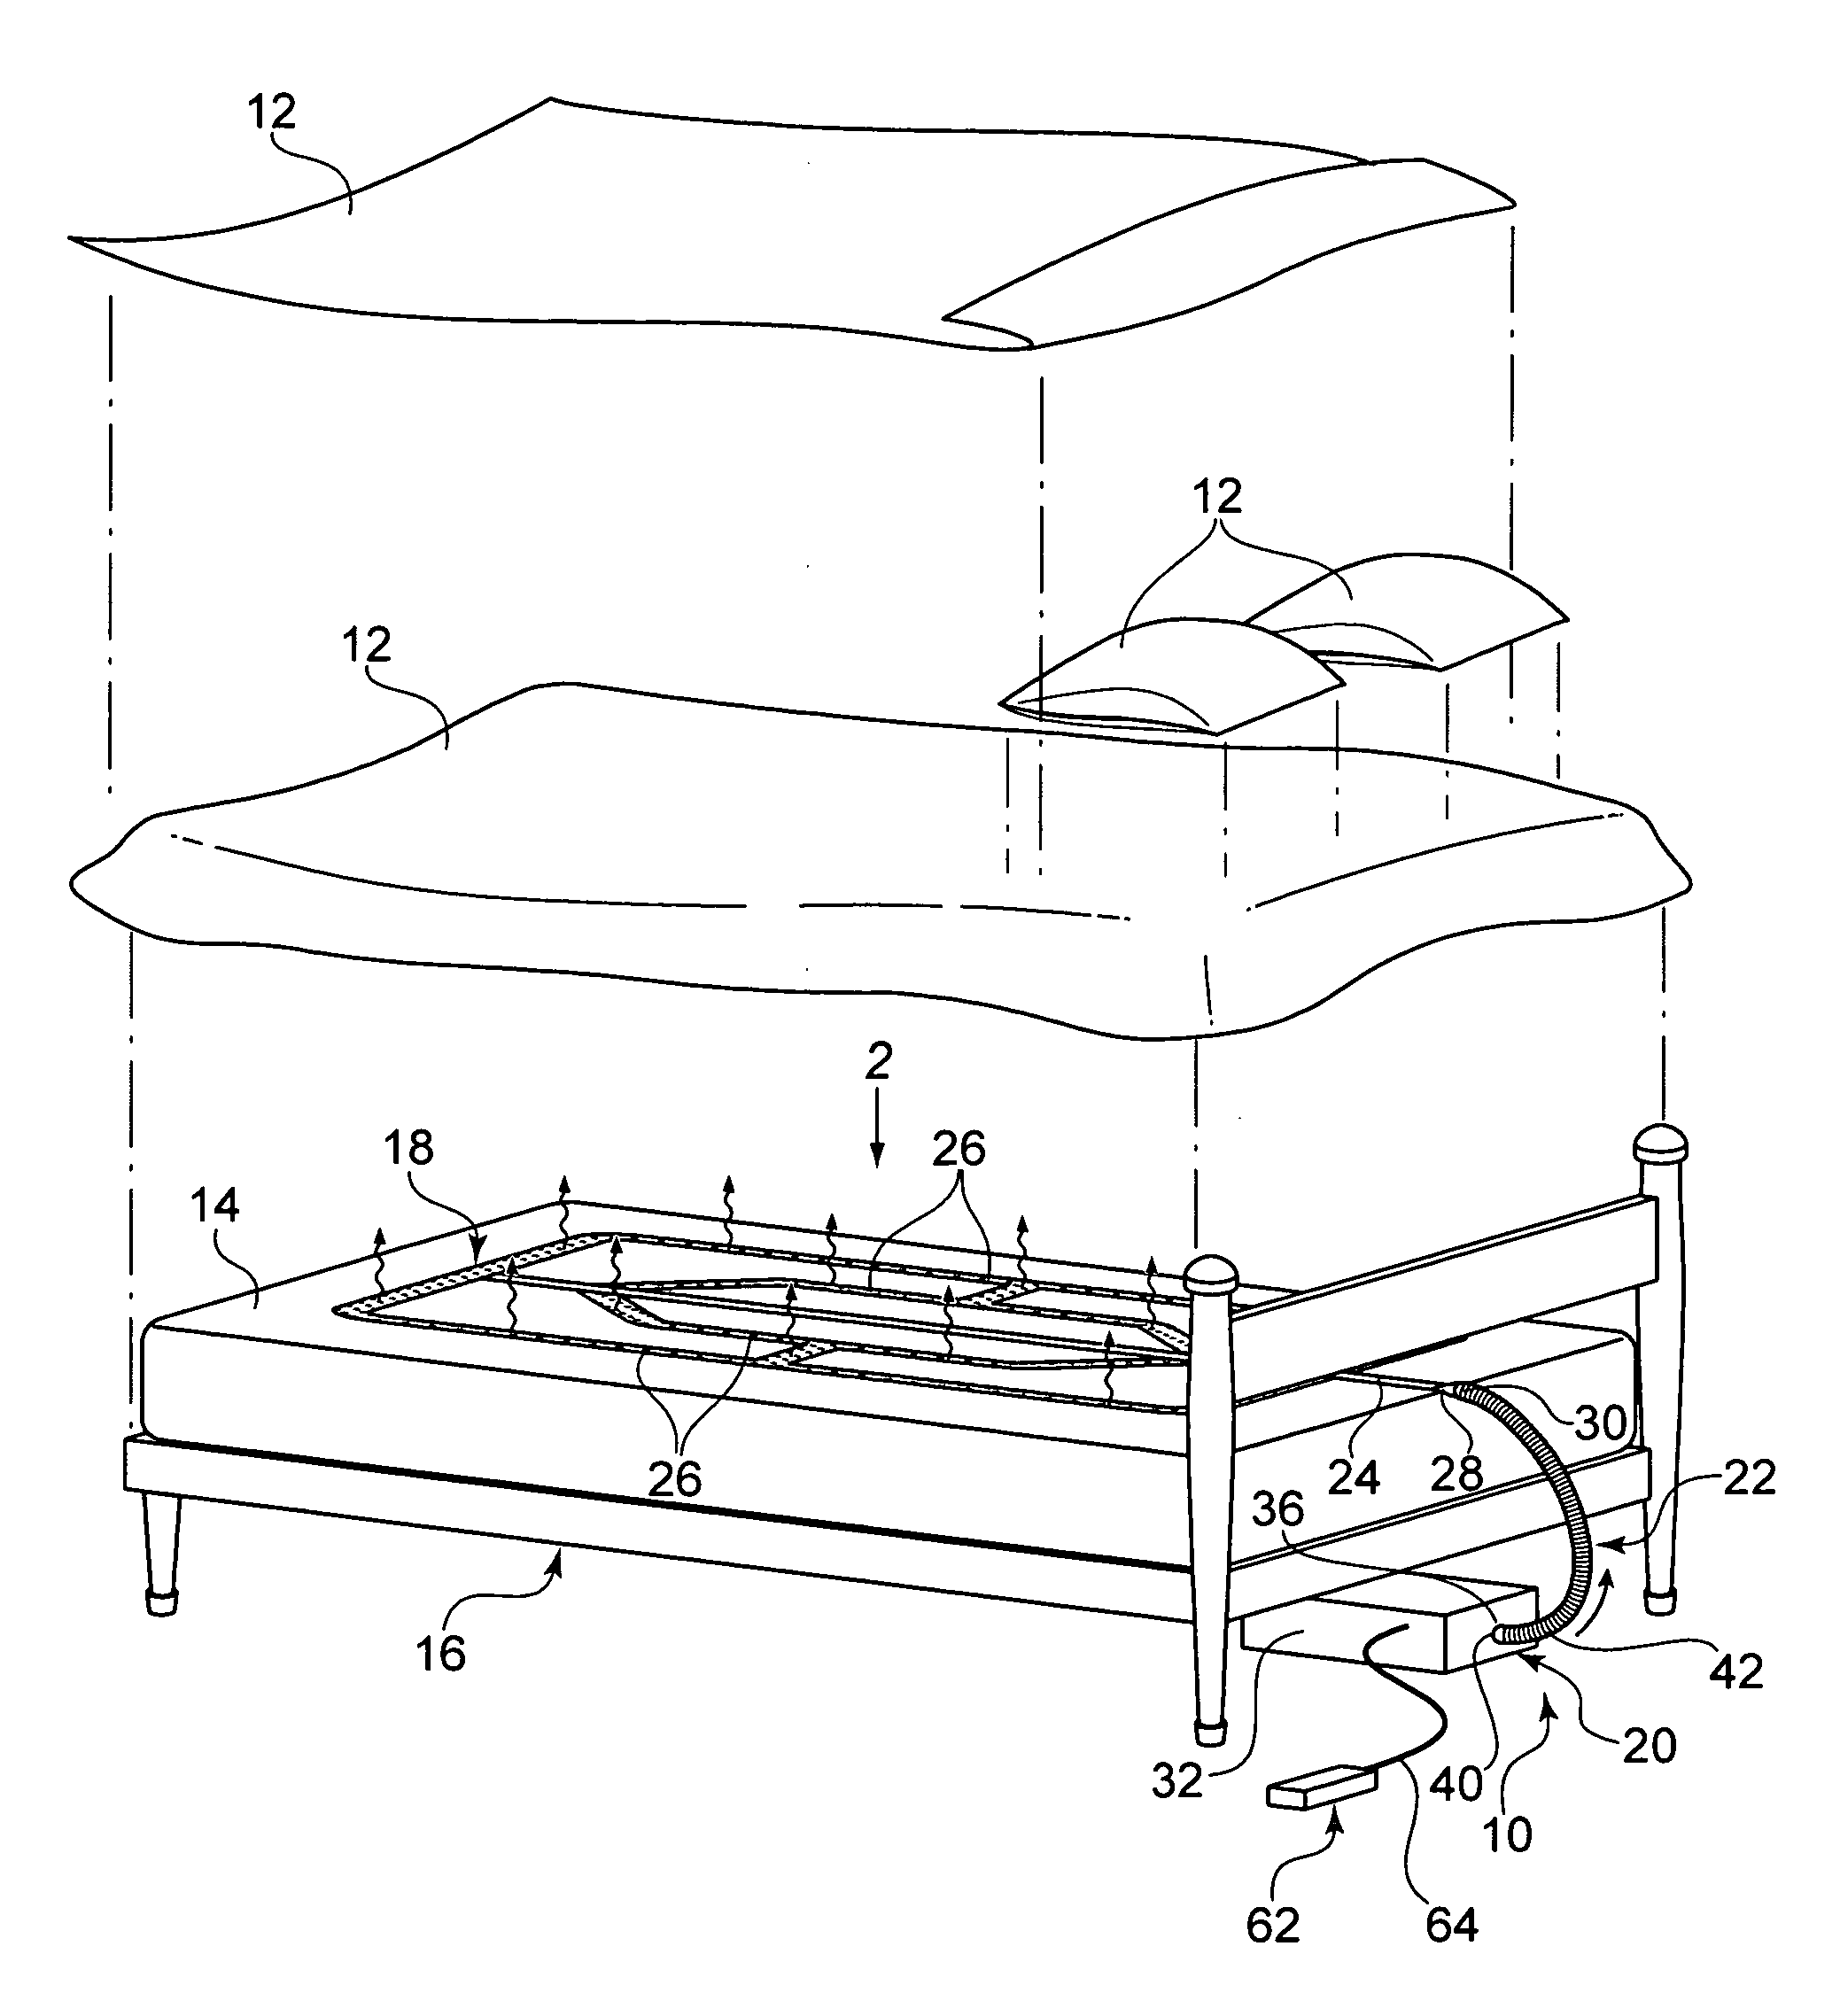 Device for heating, cooling and emitting fragrance into bedding on a bed